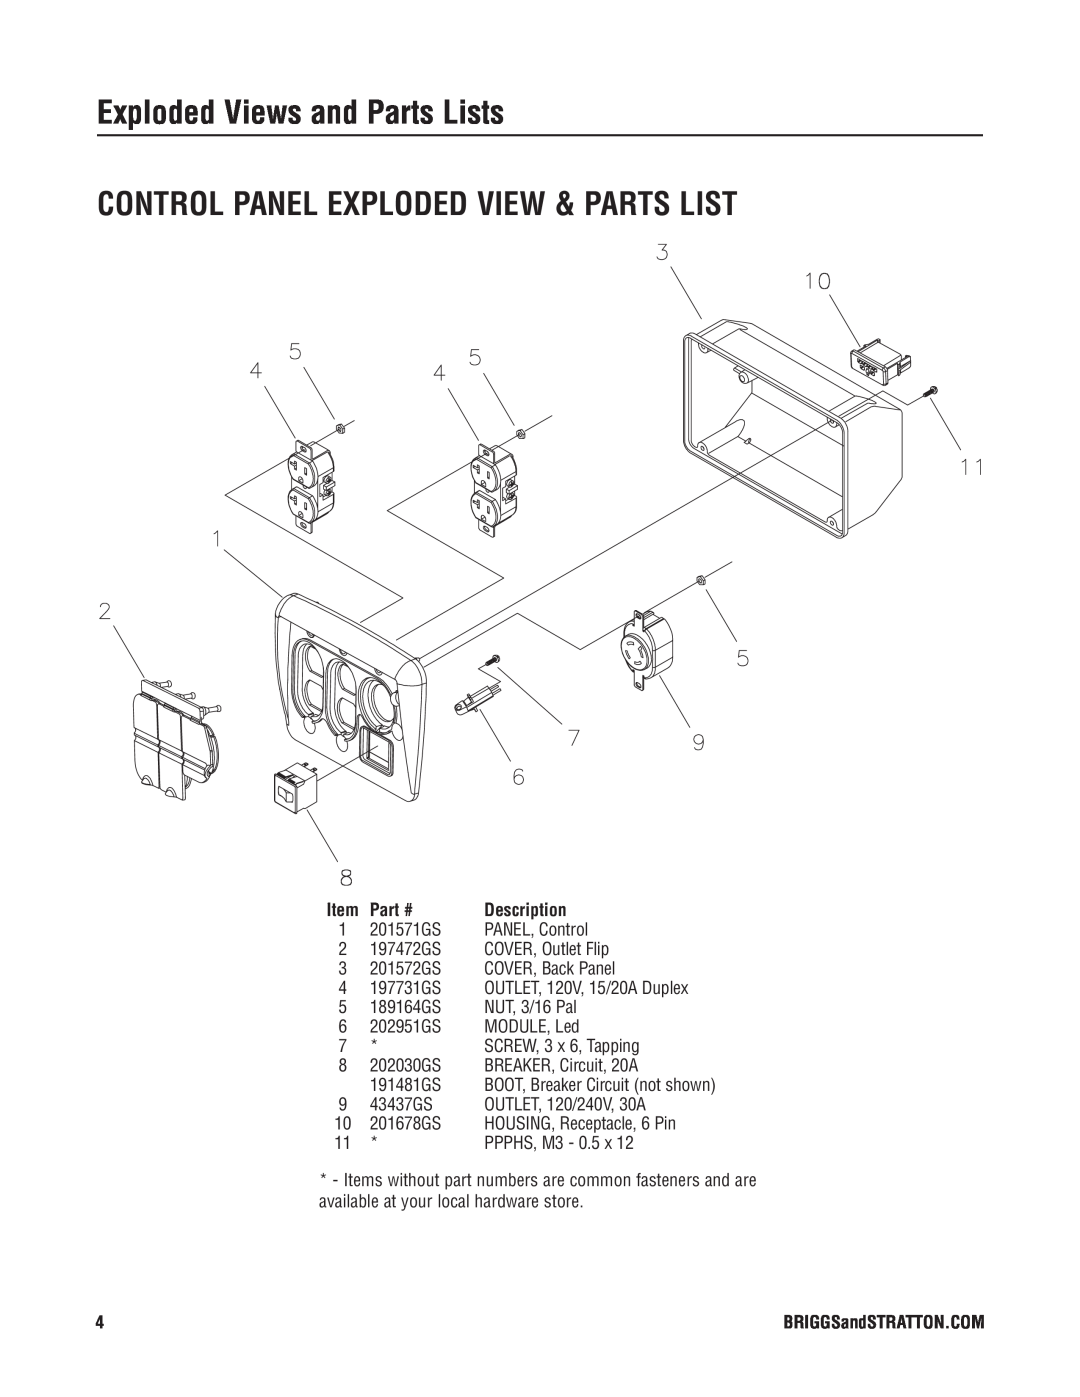 Briggs & Stratton 30424 Control Panel Exploded View & Parts List, 201571GS, Exploded Views and Parts Lists, Description 